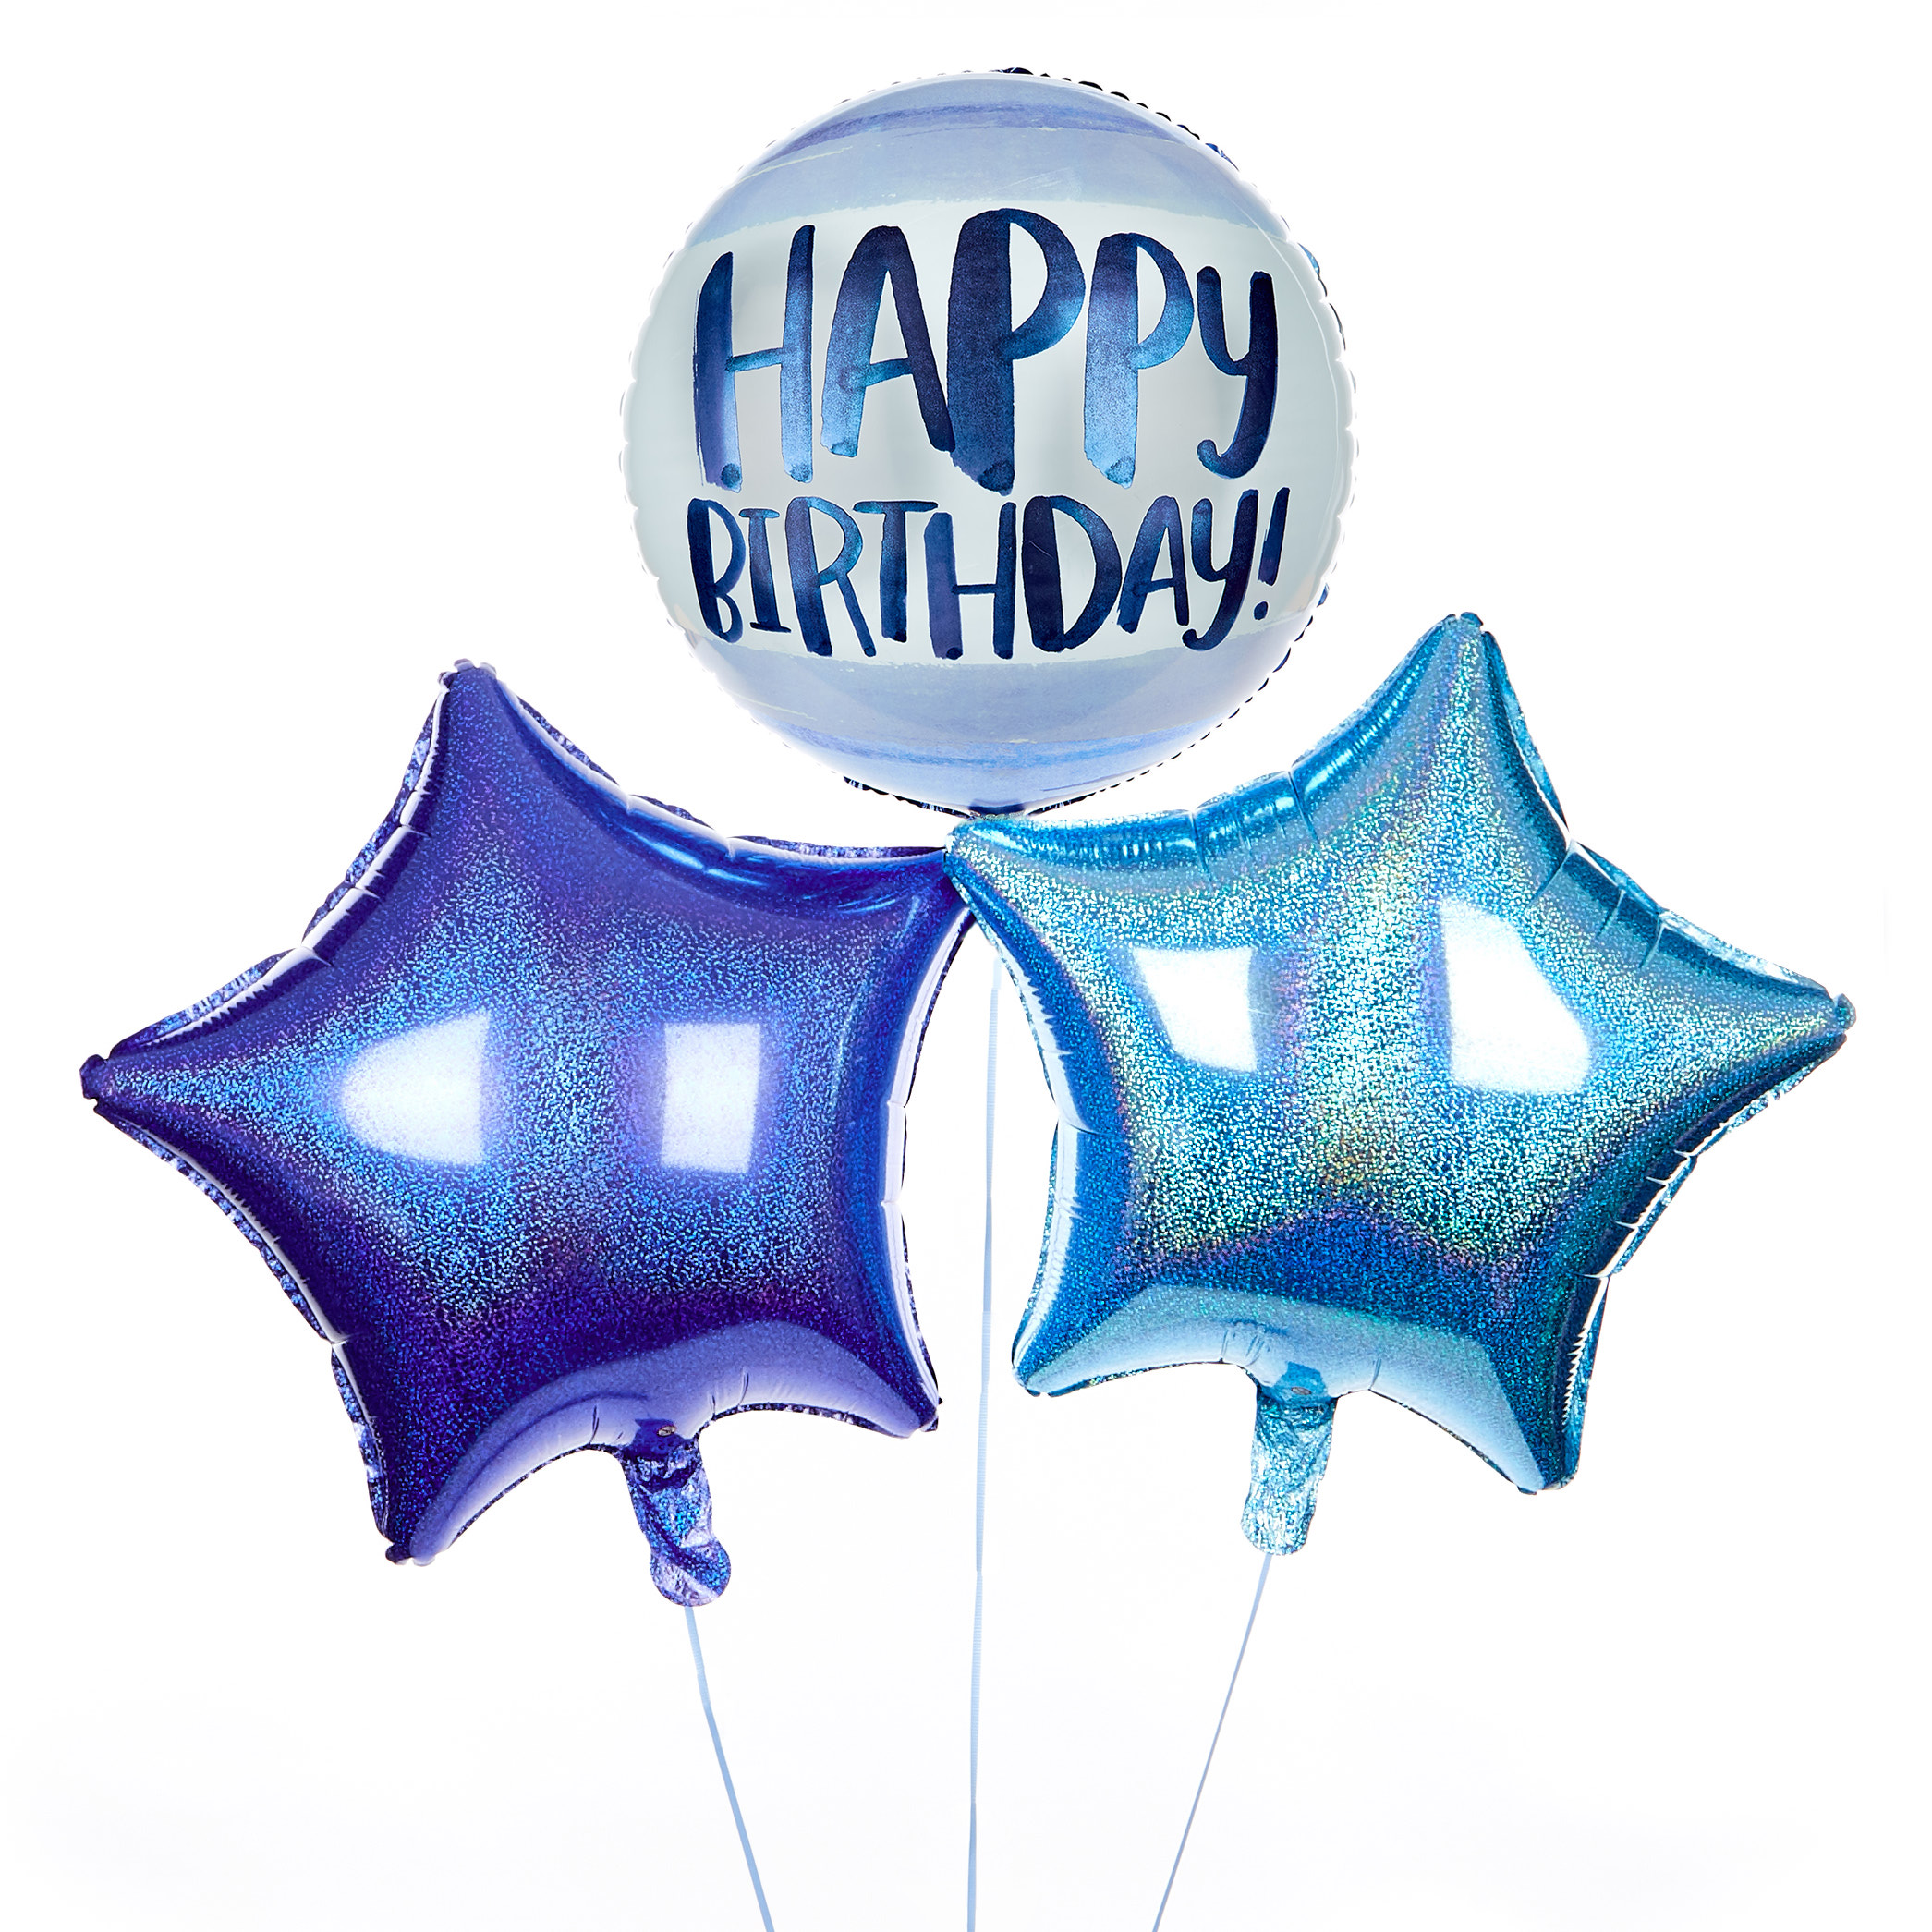 Blue Watercolour Happy Birthday Balloon Bouquet - DELIVERED INFLATED!